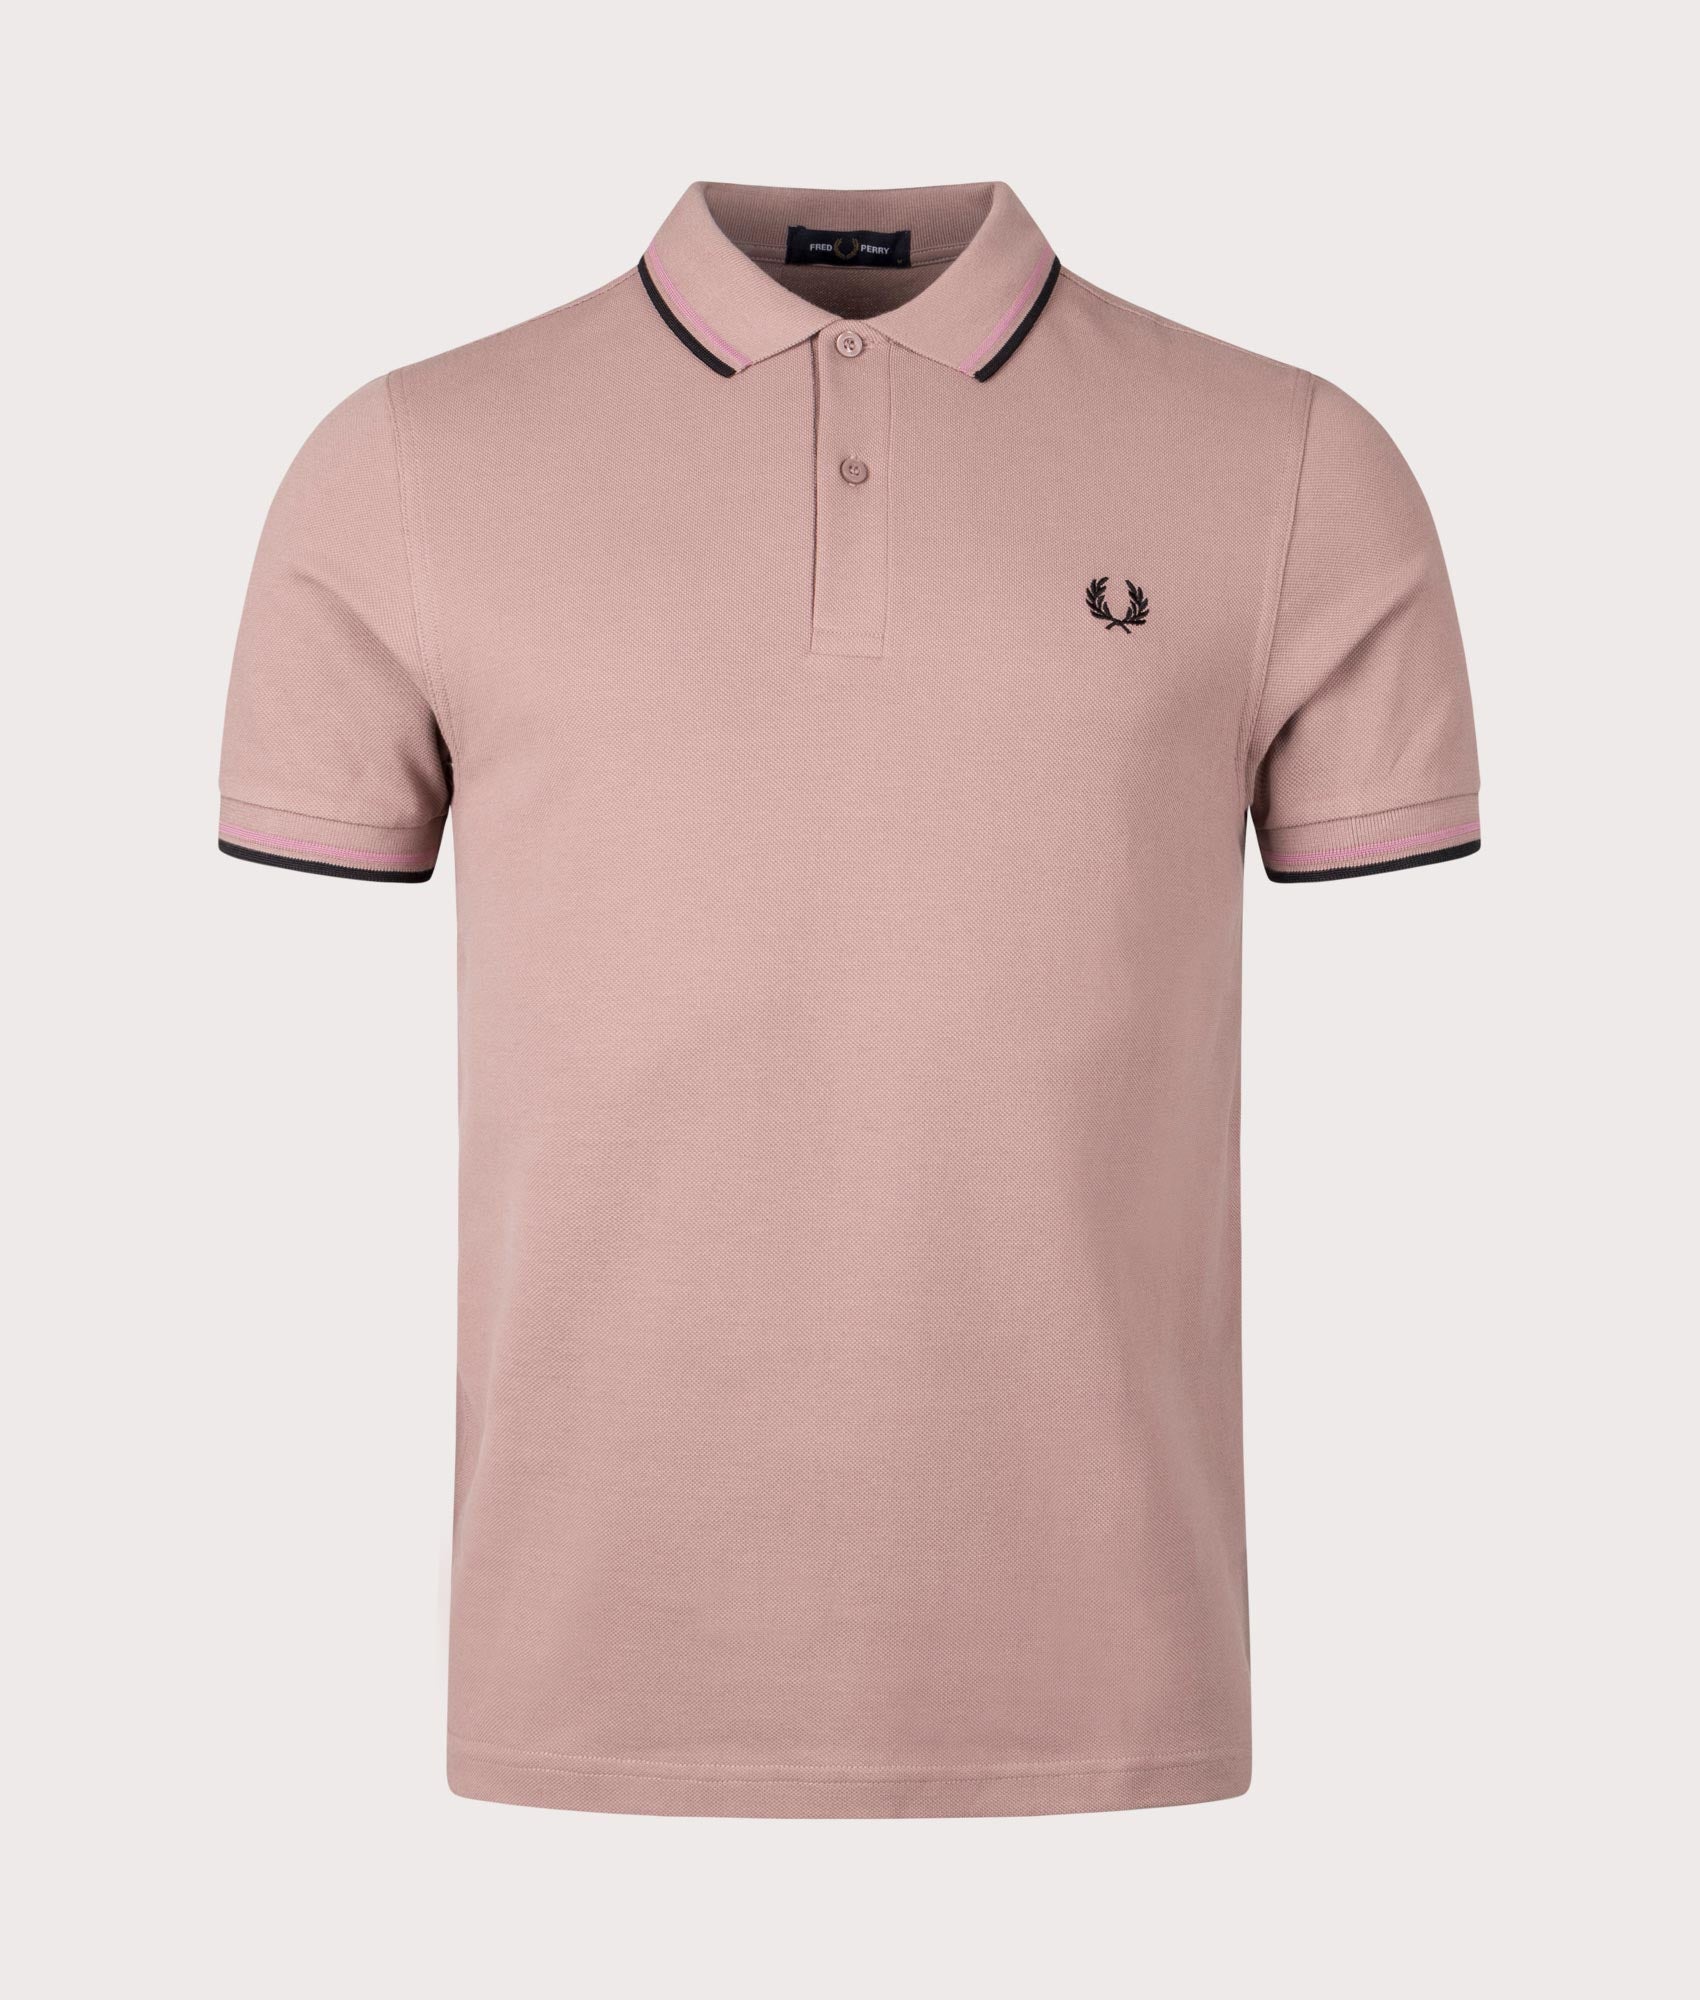 Fred Perry Mens Twin Tipped Fred Perry Polo Shirt - Colour: U89 Dark Pink/Dusty Rose/Black - Size: M